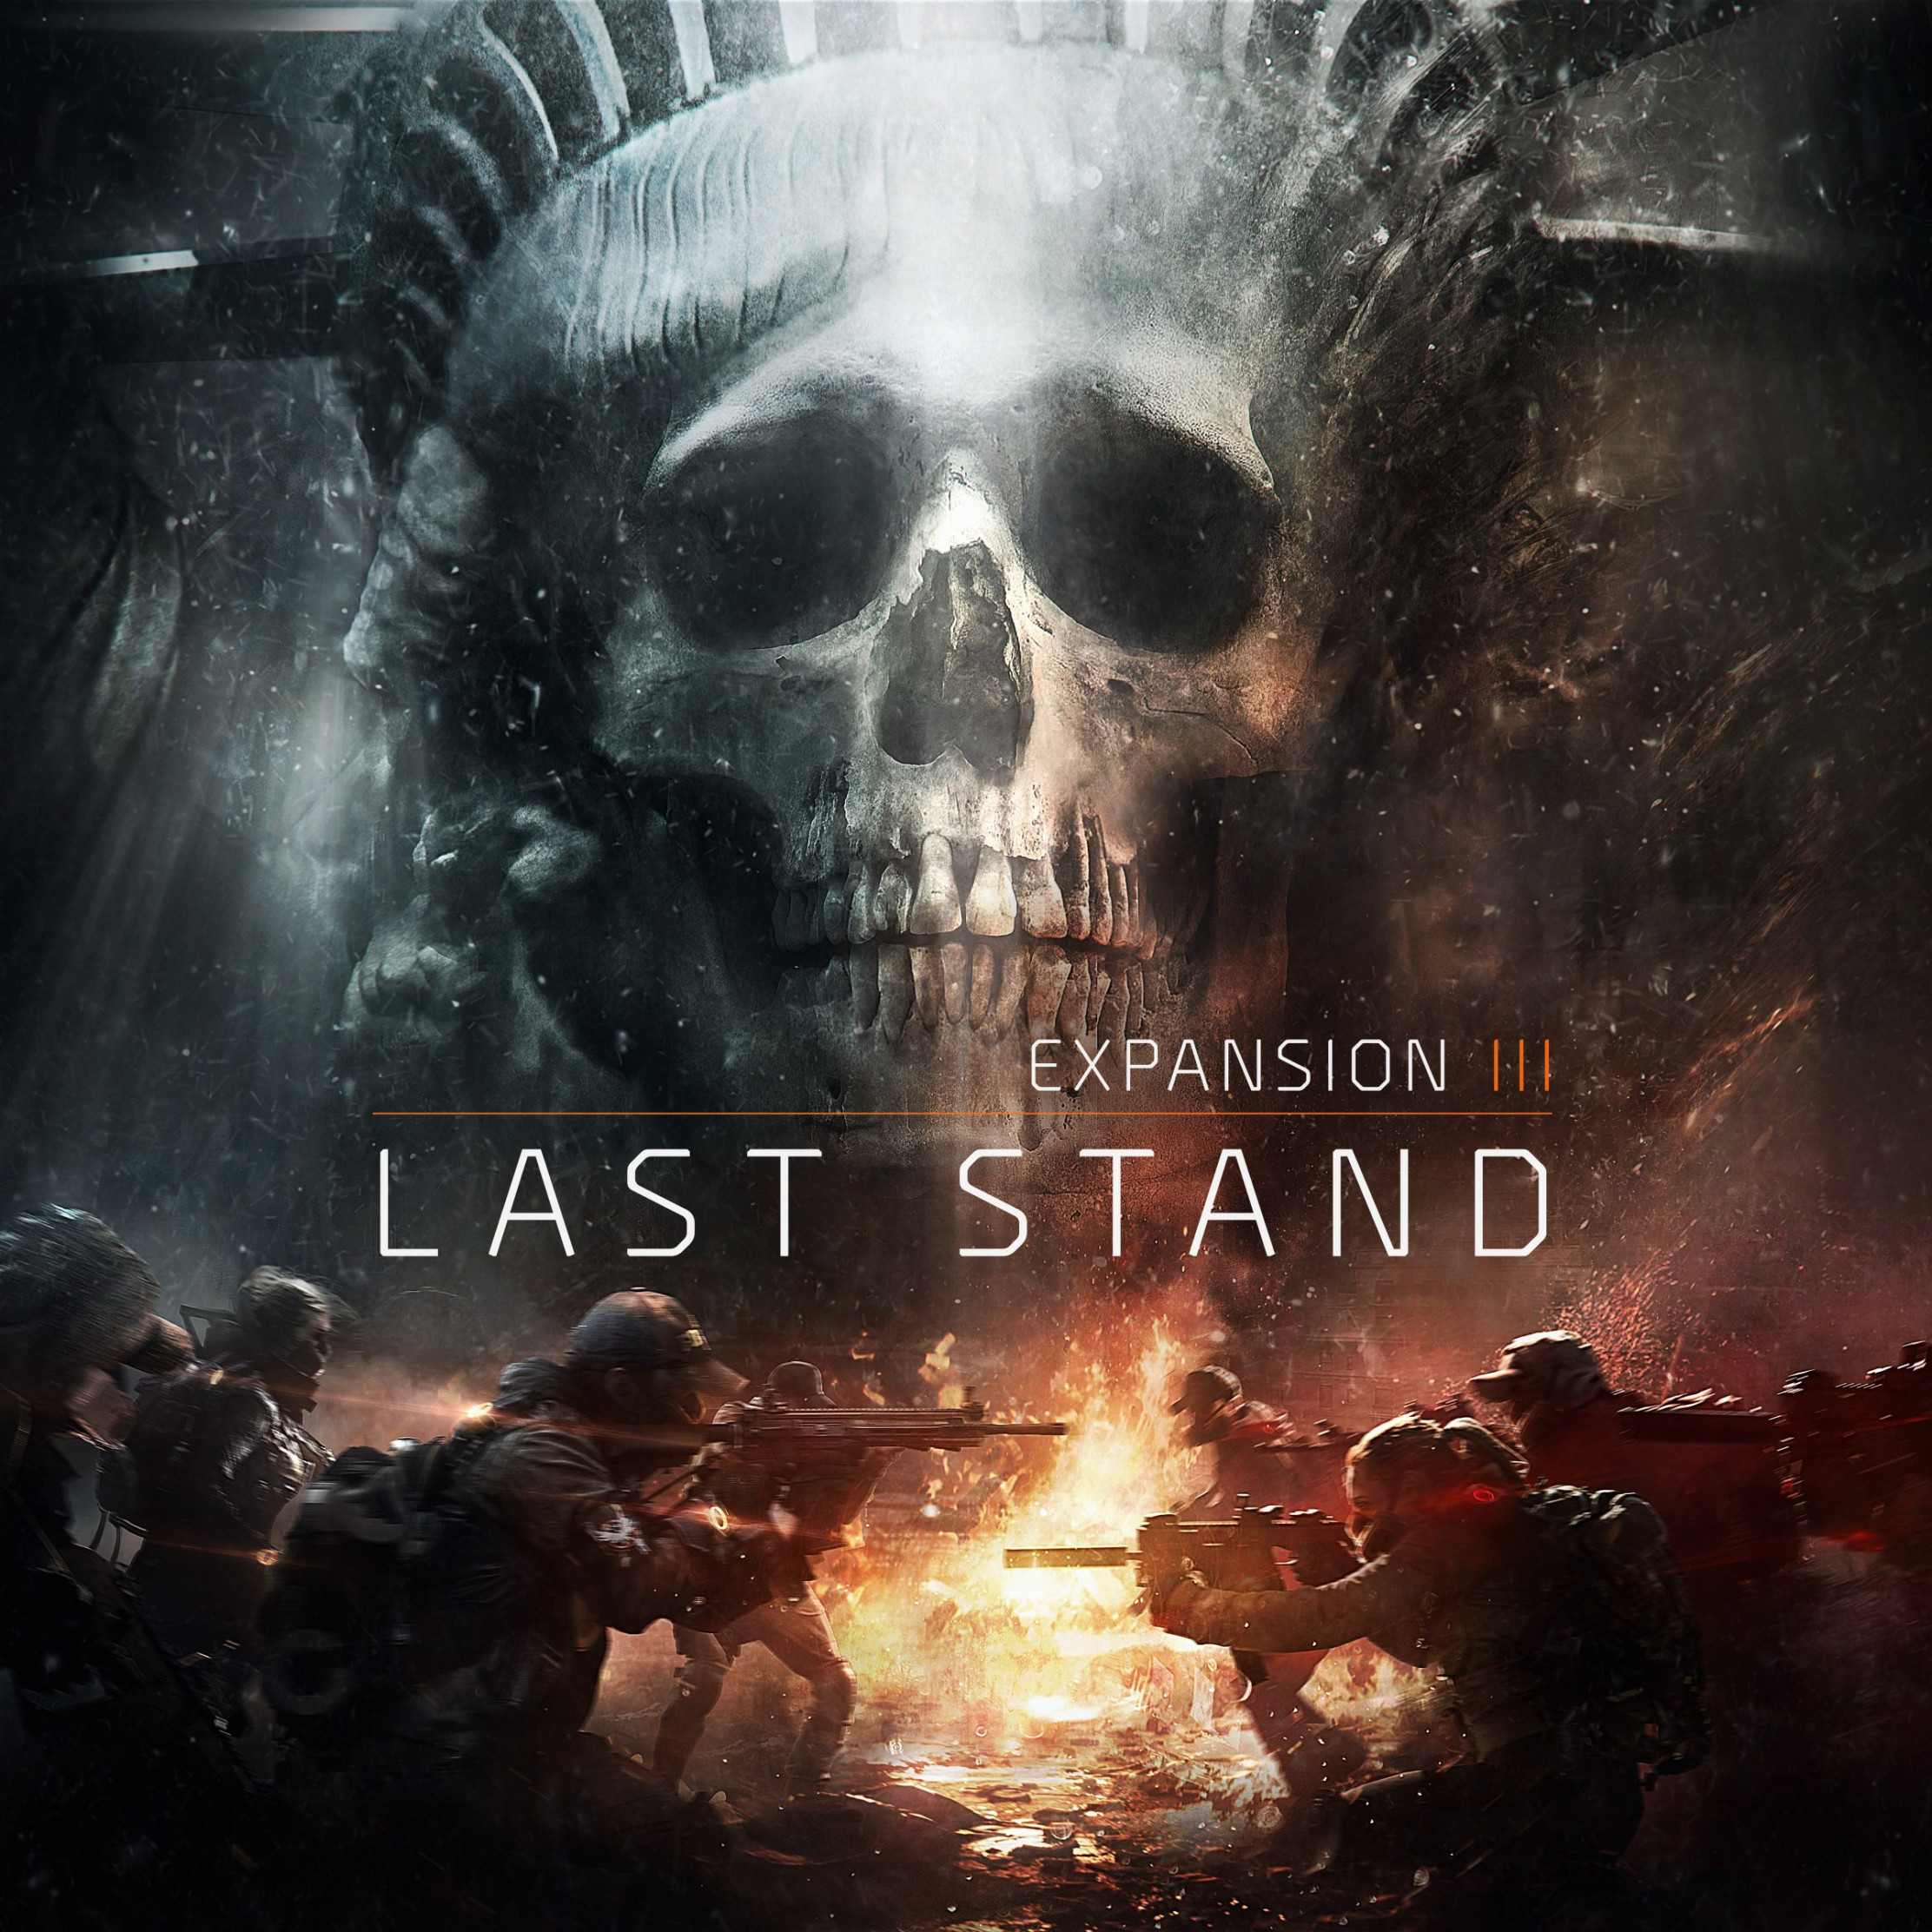 The Division Last Stand Expansion 3 wallpaper 2224x2224